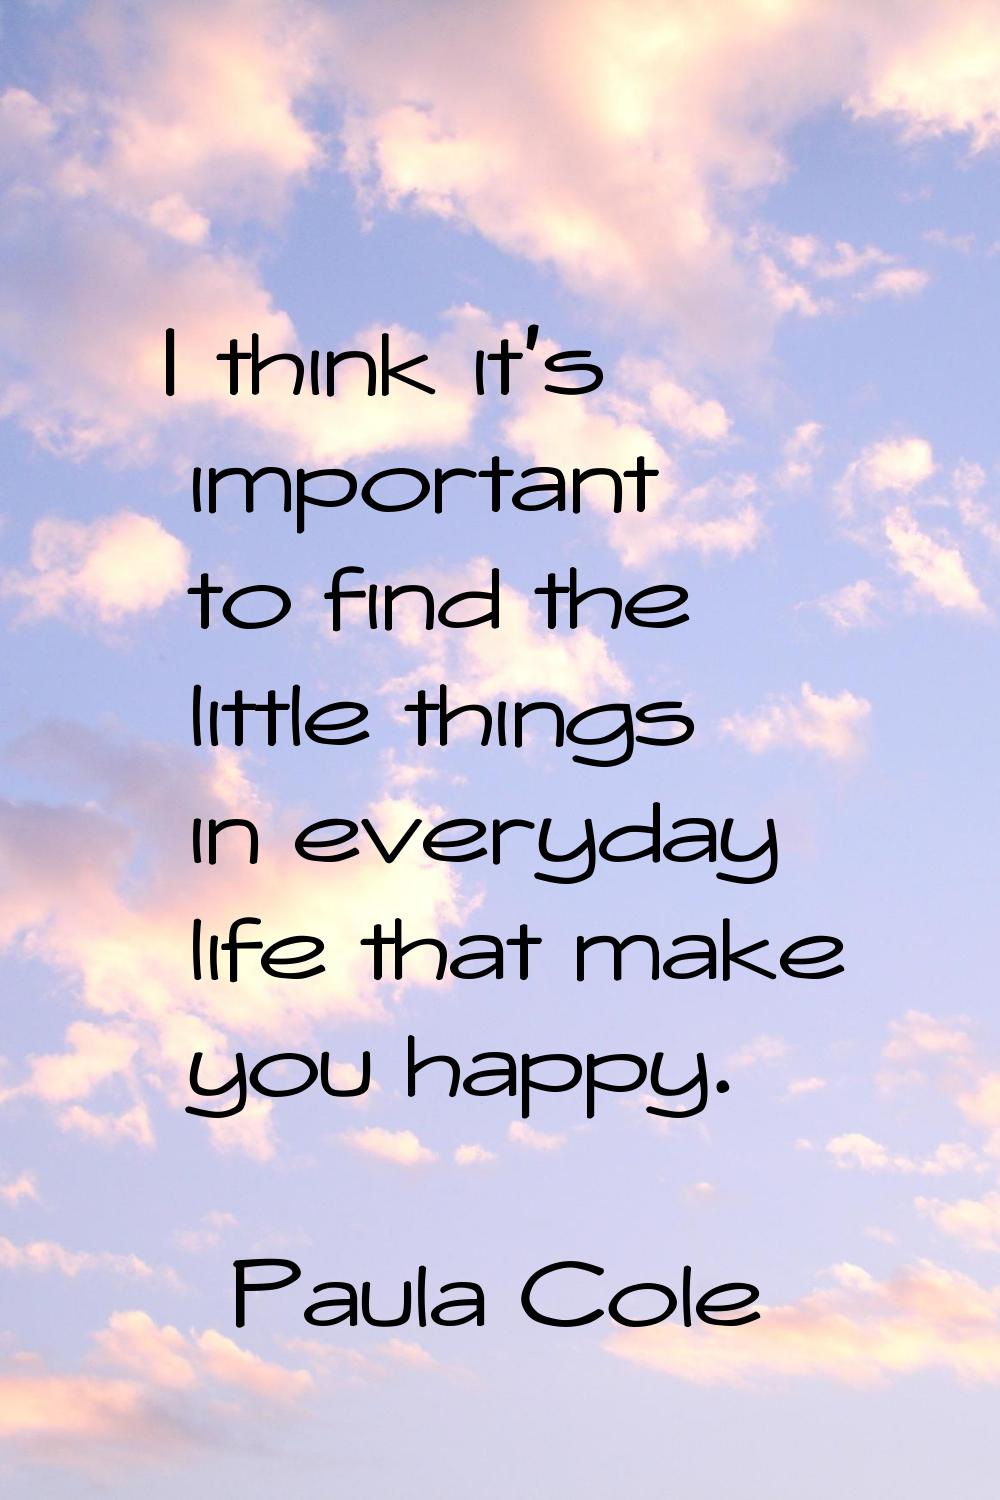 I think it's important to find the little things in everyday life that make you happy.